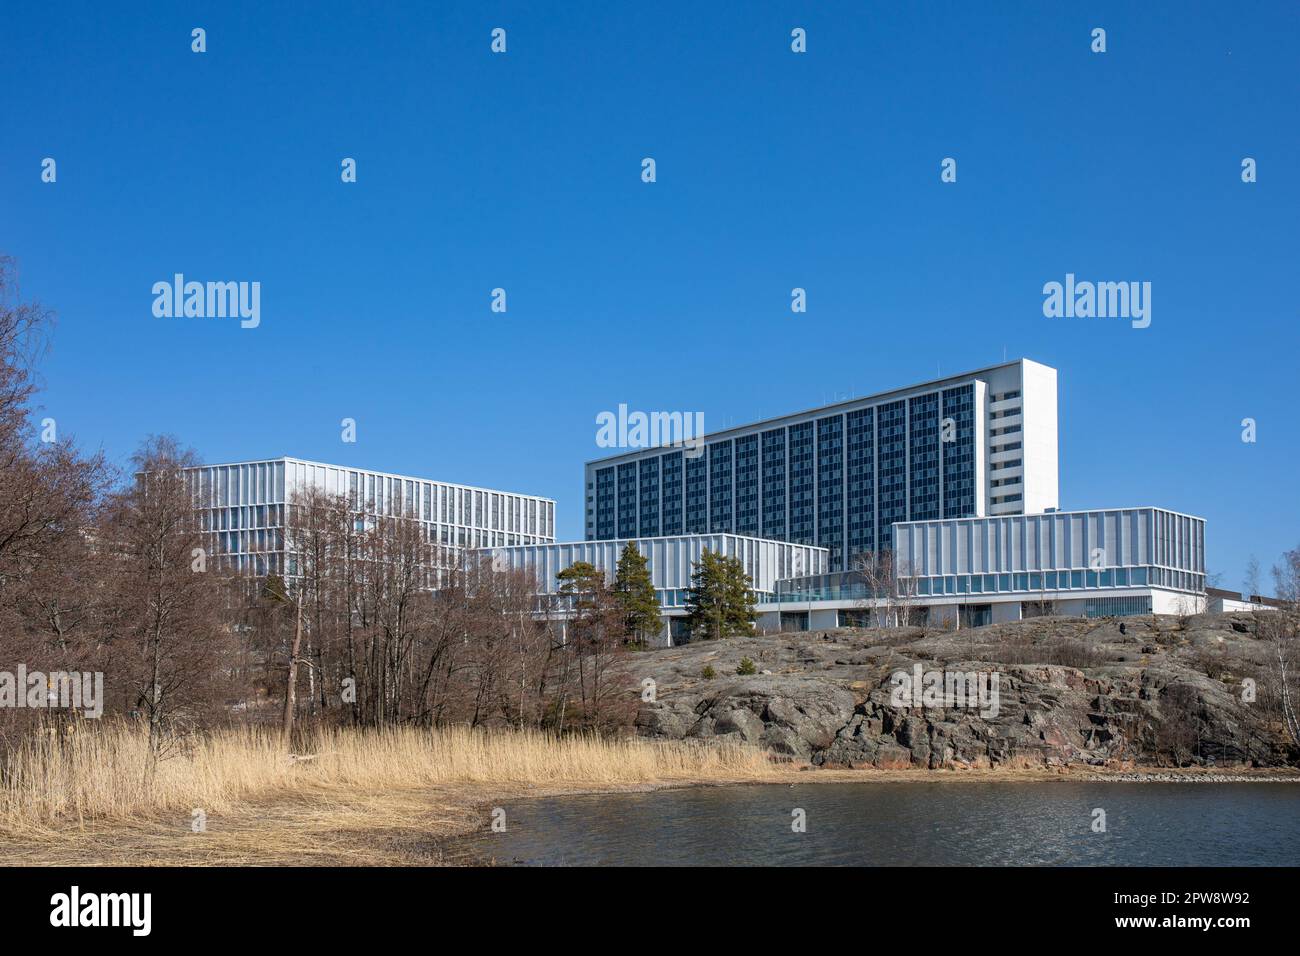 Siltasairaala and Tornisairaala hospitals by Humallahti Bay against clear blue sky on a sunny spring day  in Meilahti district of Helsinki, Finland Stock Photo